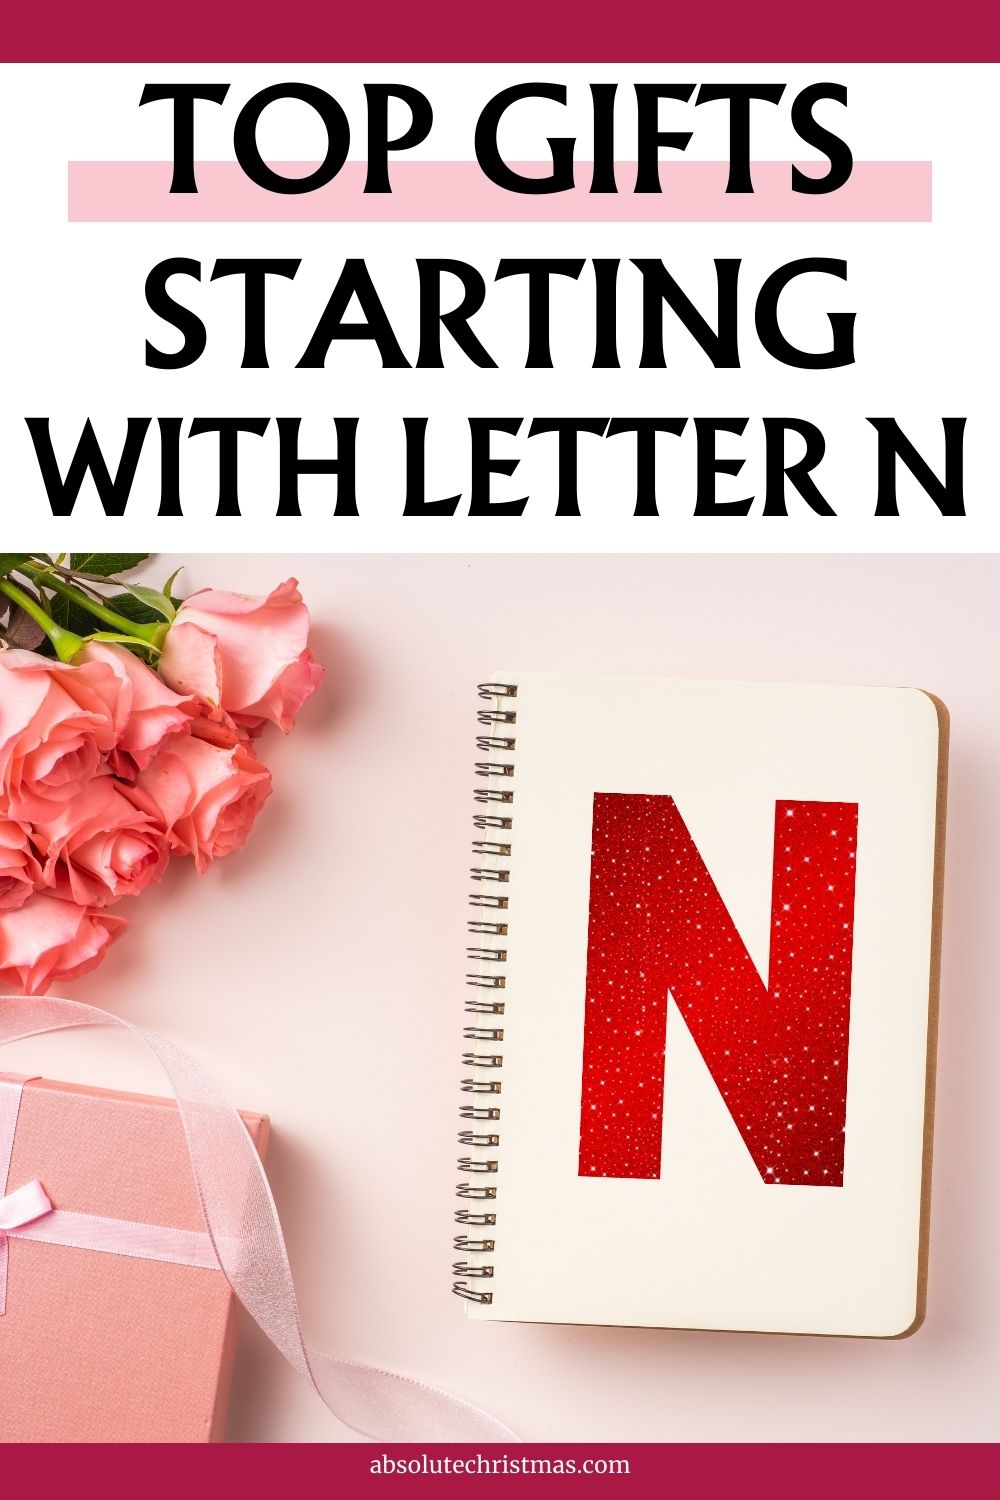 Top Gifts Starting With Letter N